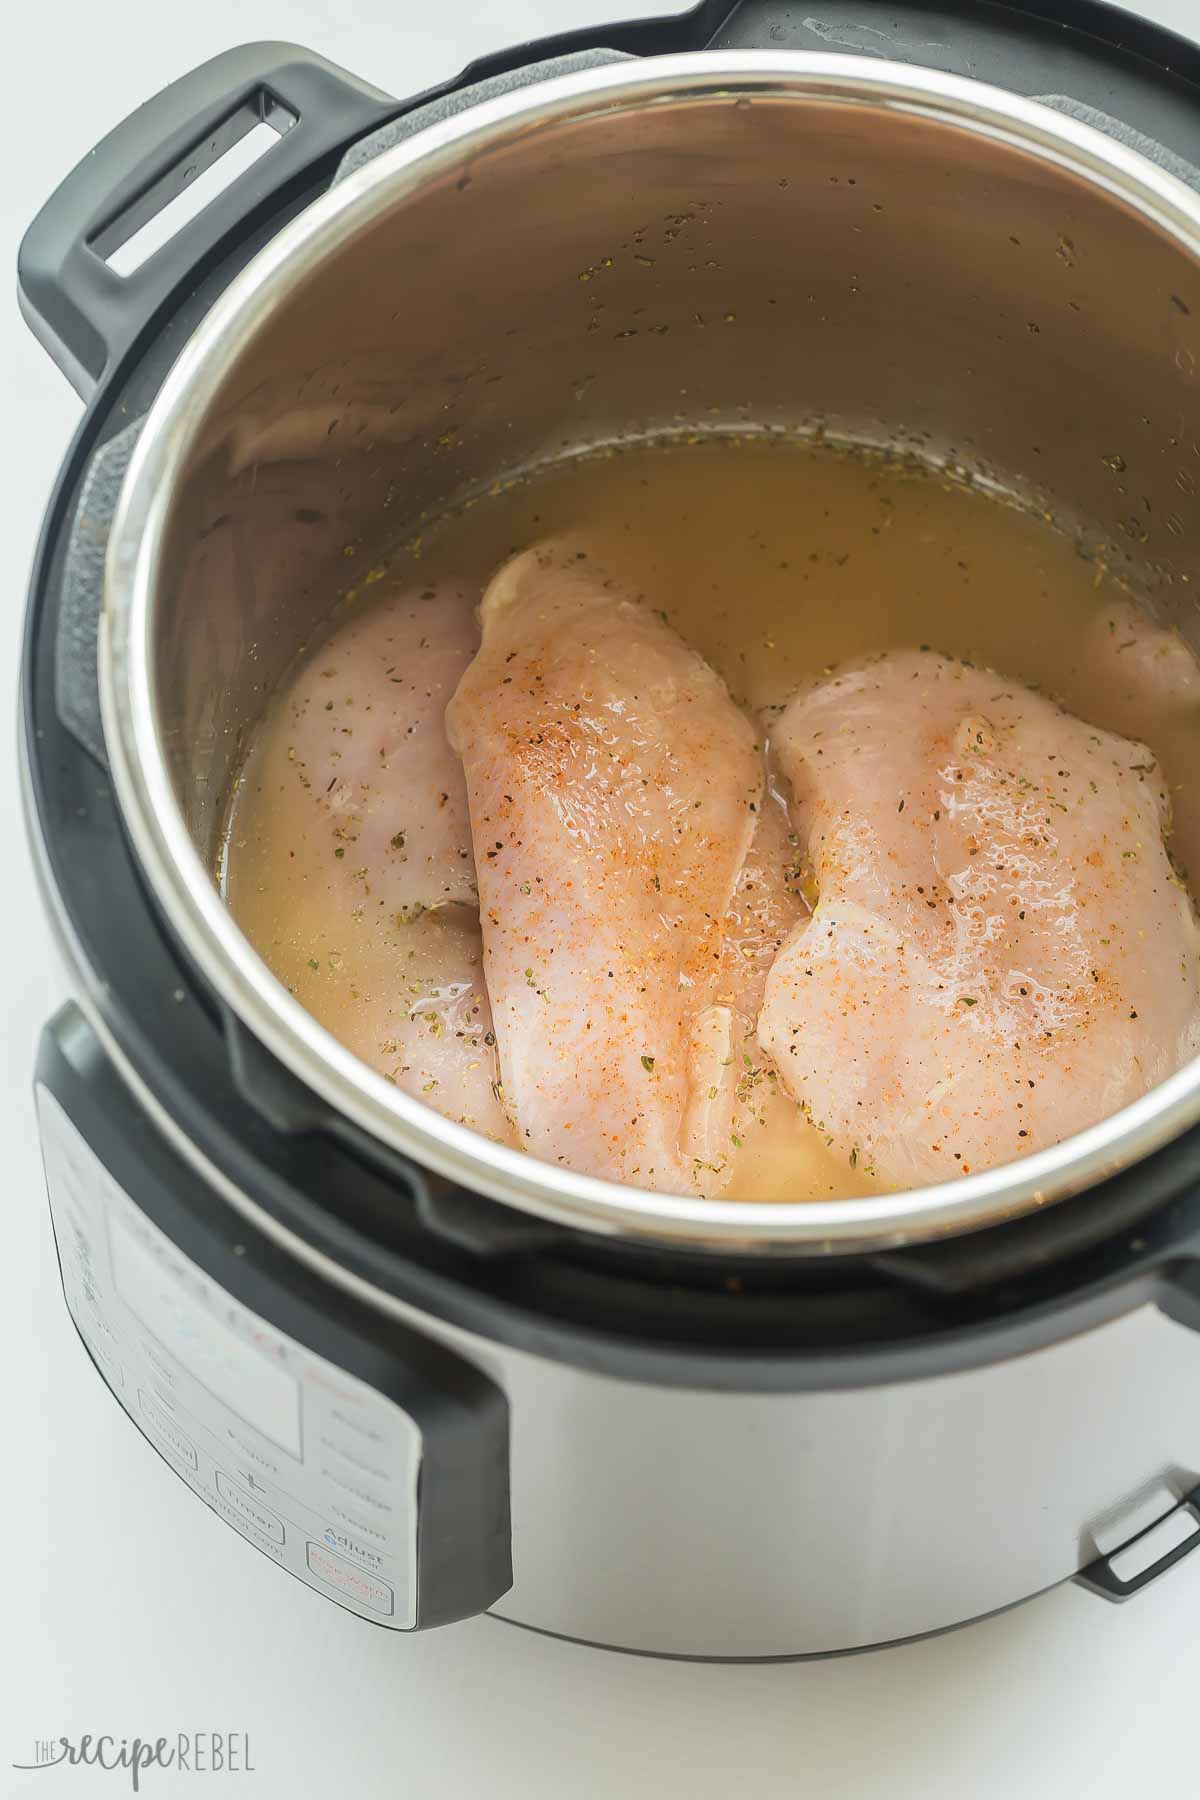 four chicken breasts in instant pot with seasoning ready to cook.